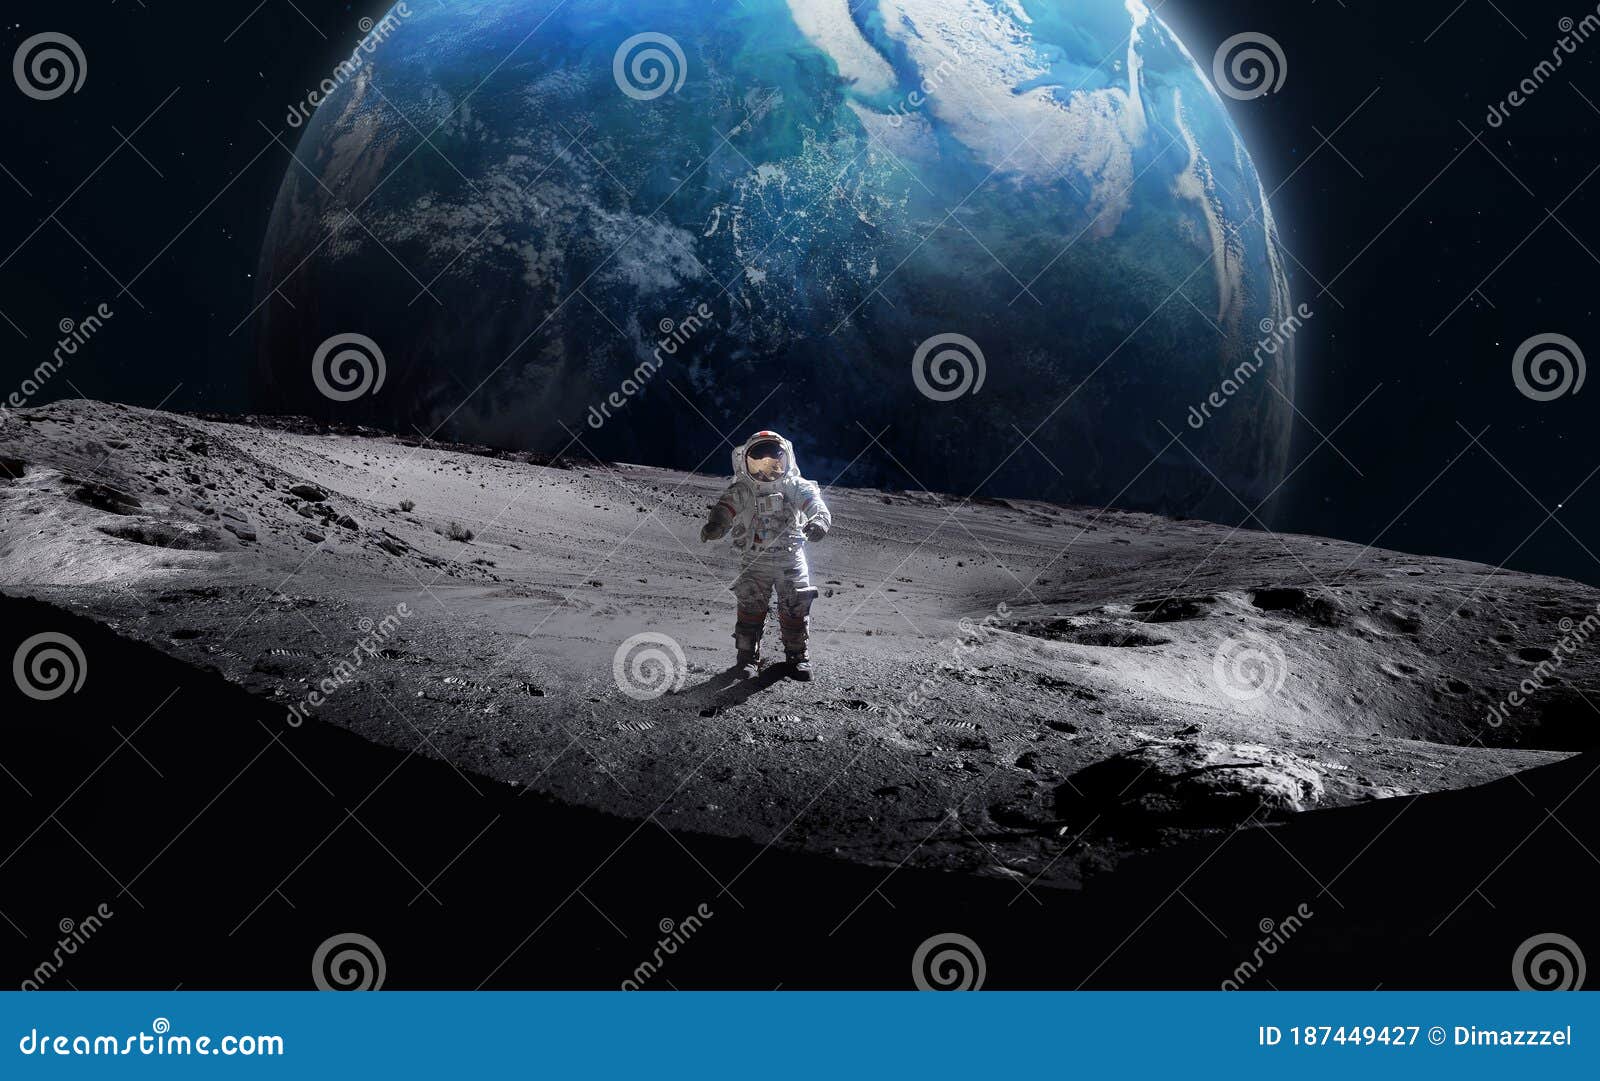 astronaut on surface of the moon. earth on background.